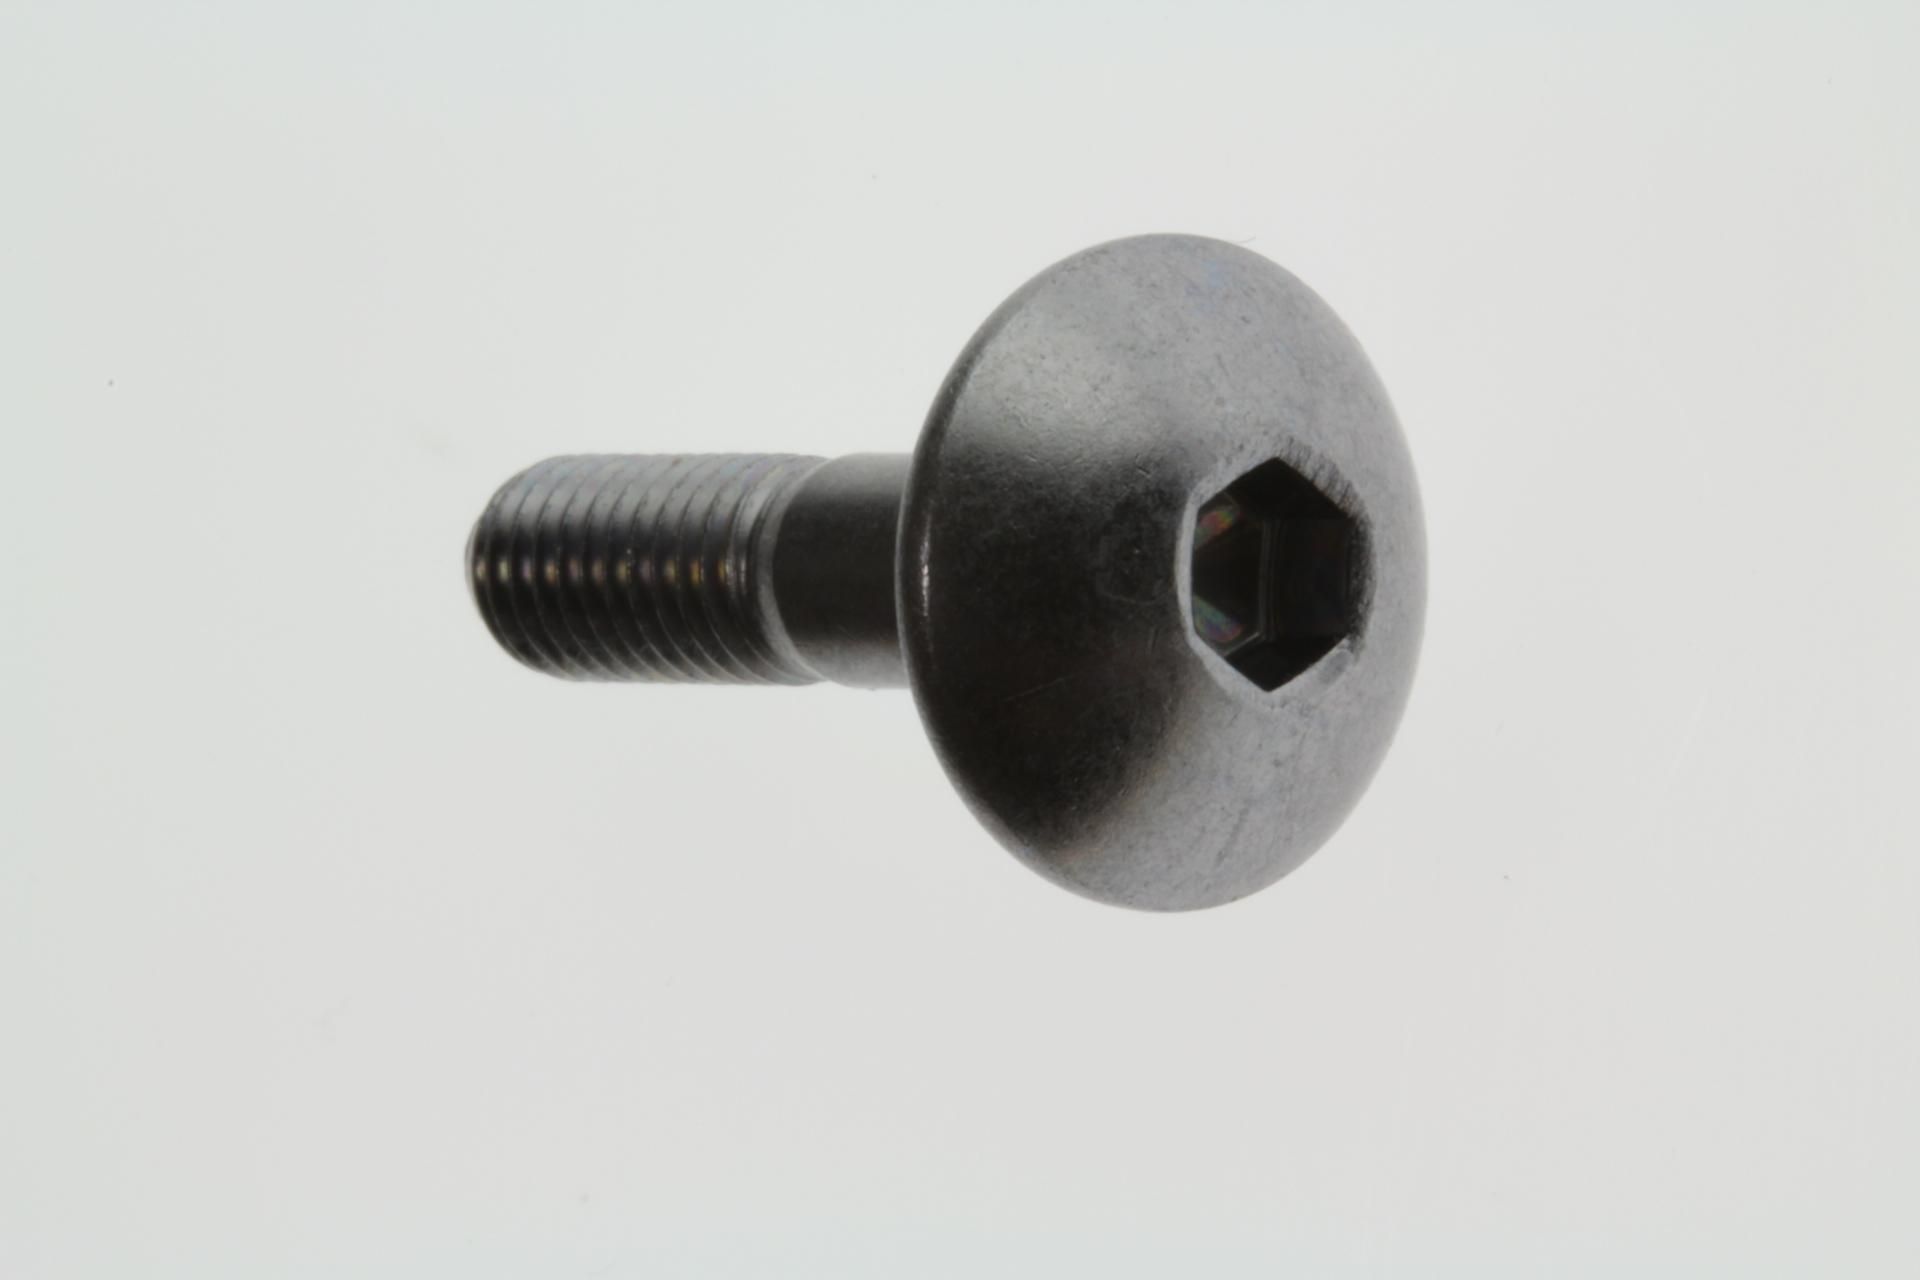 90111-05025-00 Superseded by 90111-05026-00 - BOLT,HEX. SOCKET BUT